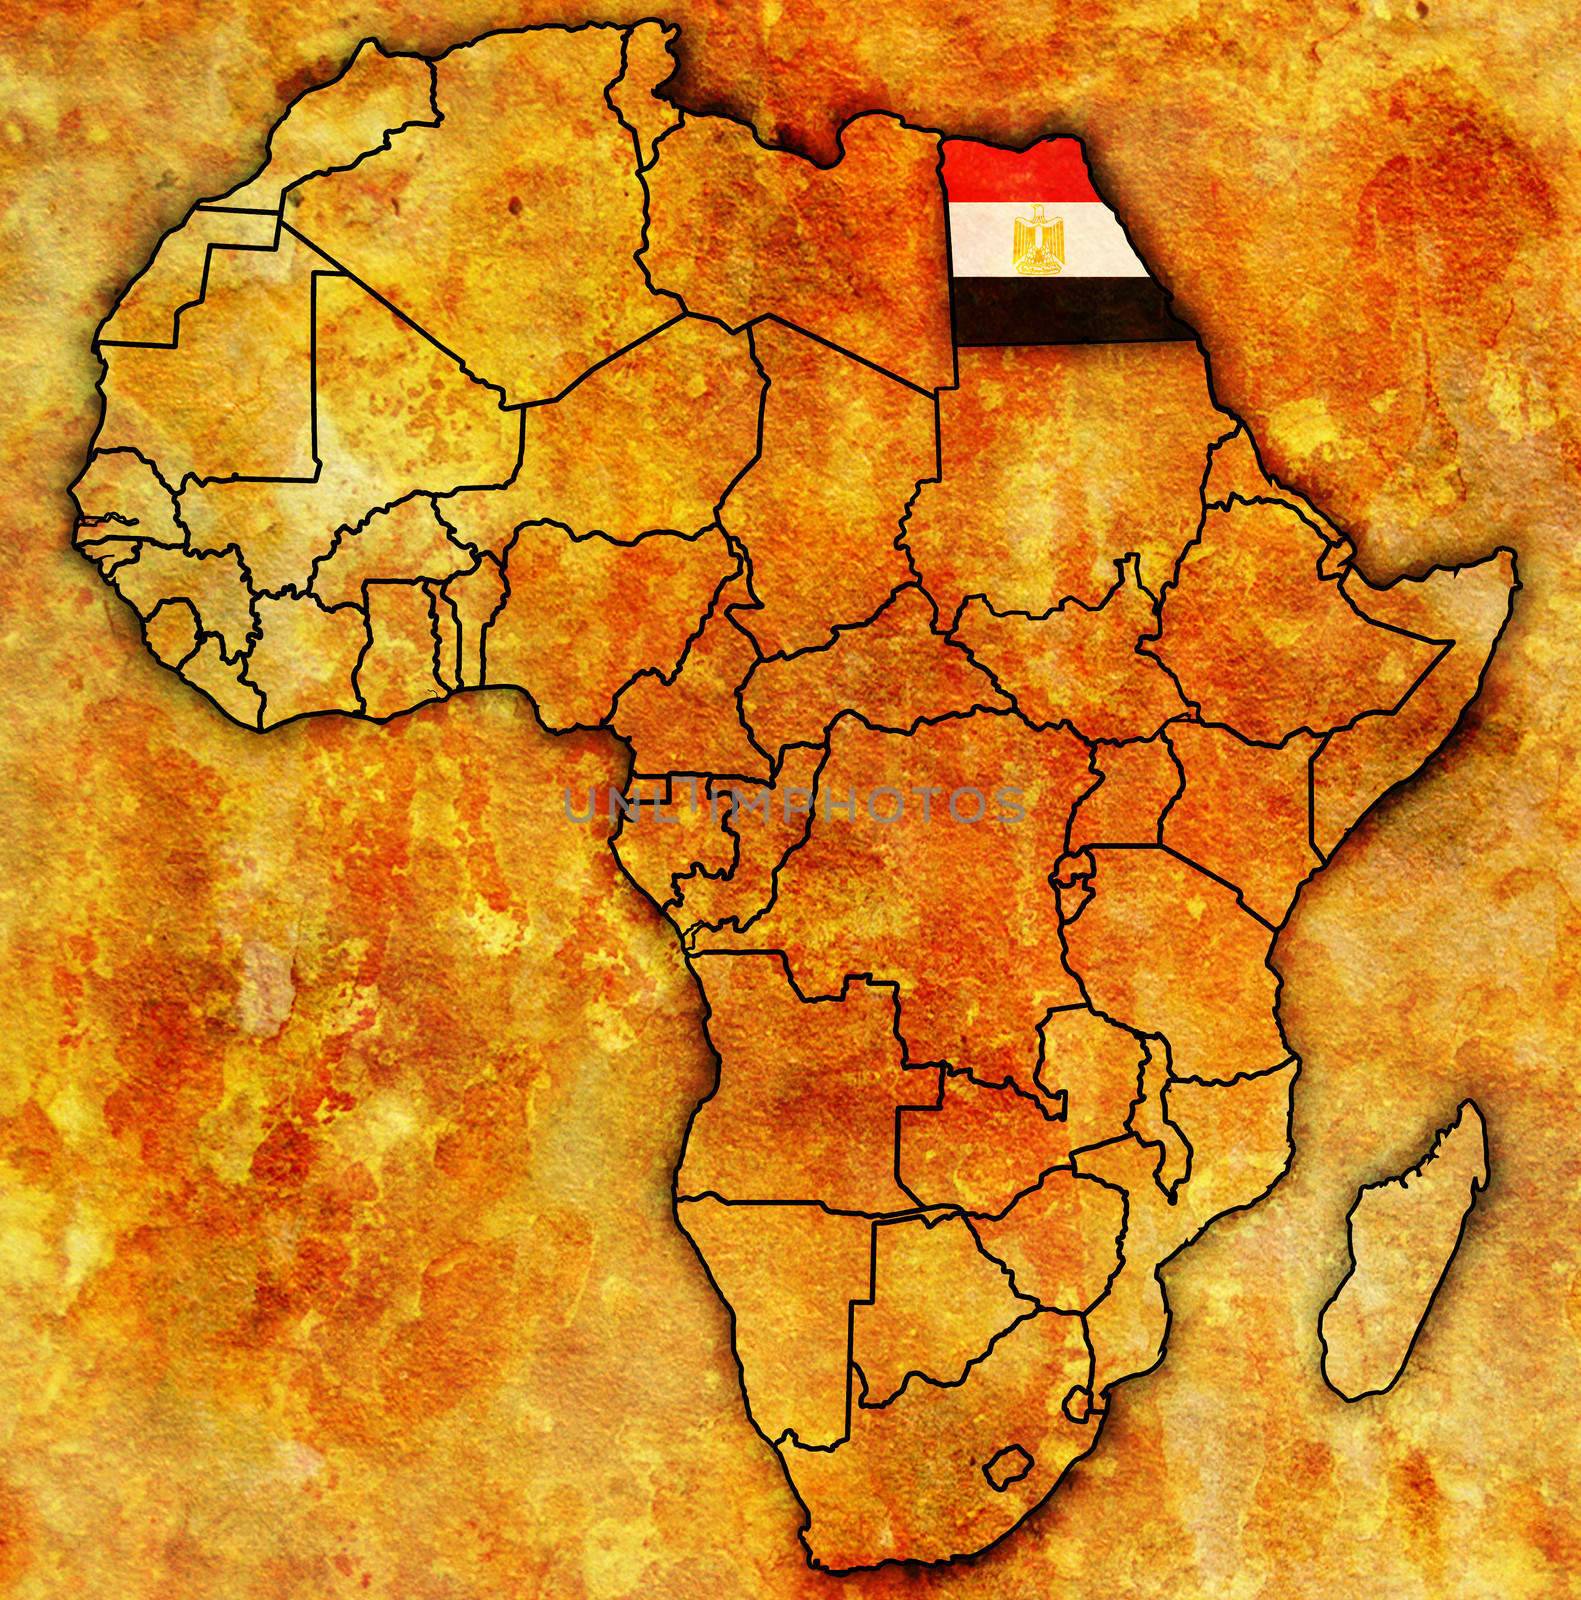 egypt on actual vintage political map of africa with flags